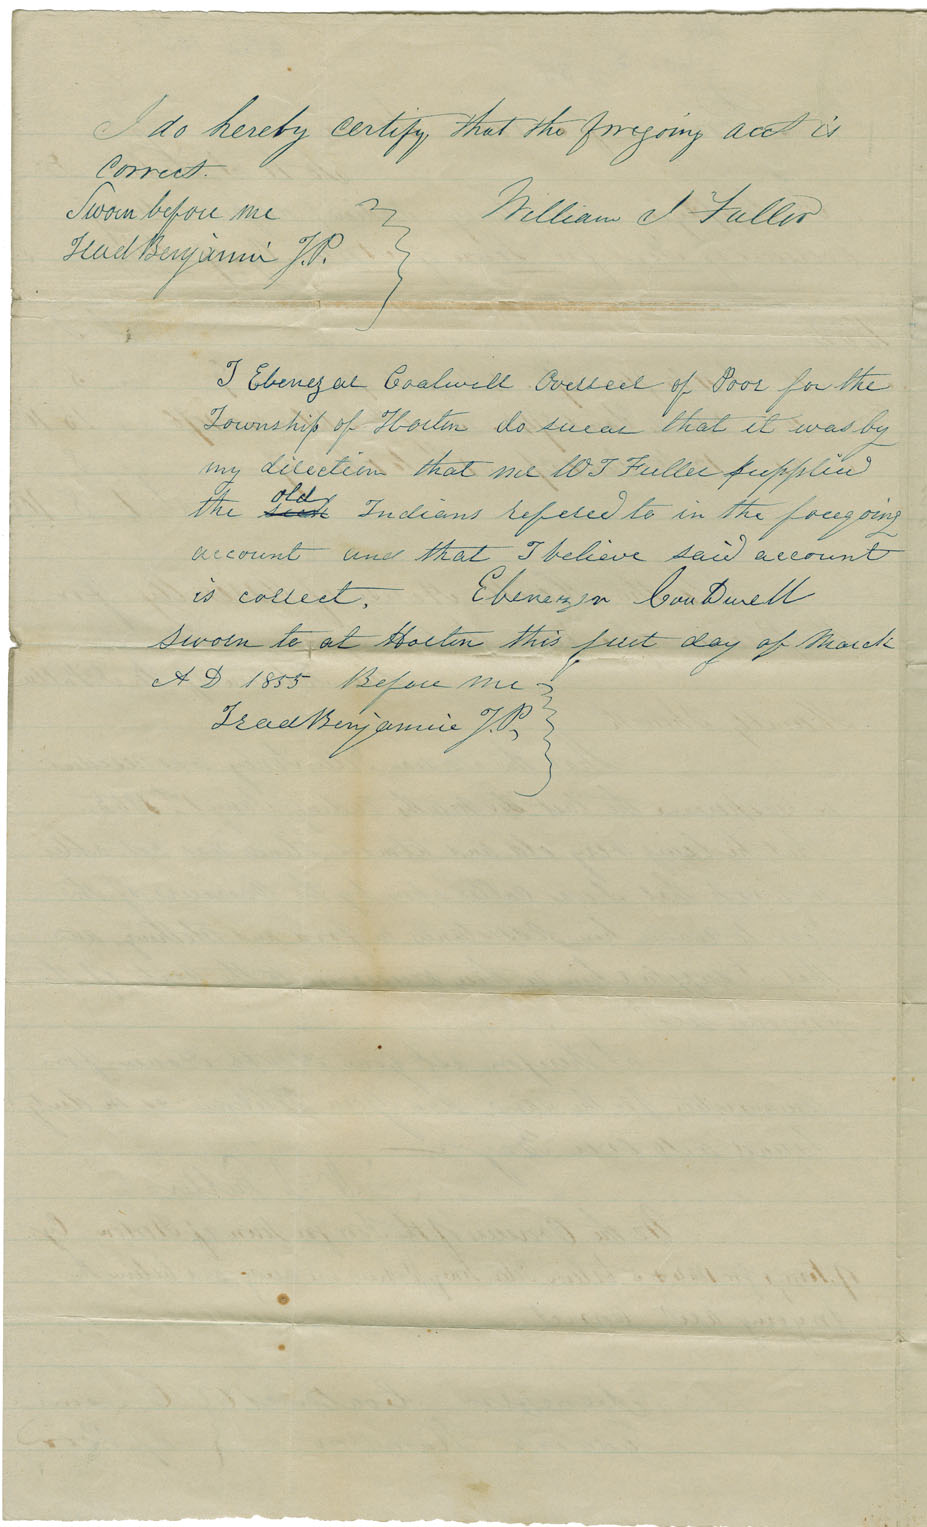 Petition of W.G. Fuller, Kings County, requesting payment for services to Mi'kmaq, especially Peter Toney.